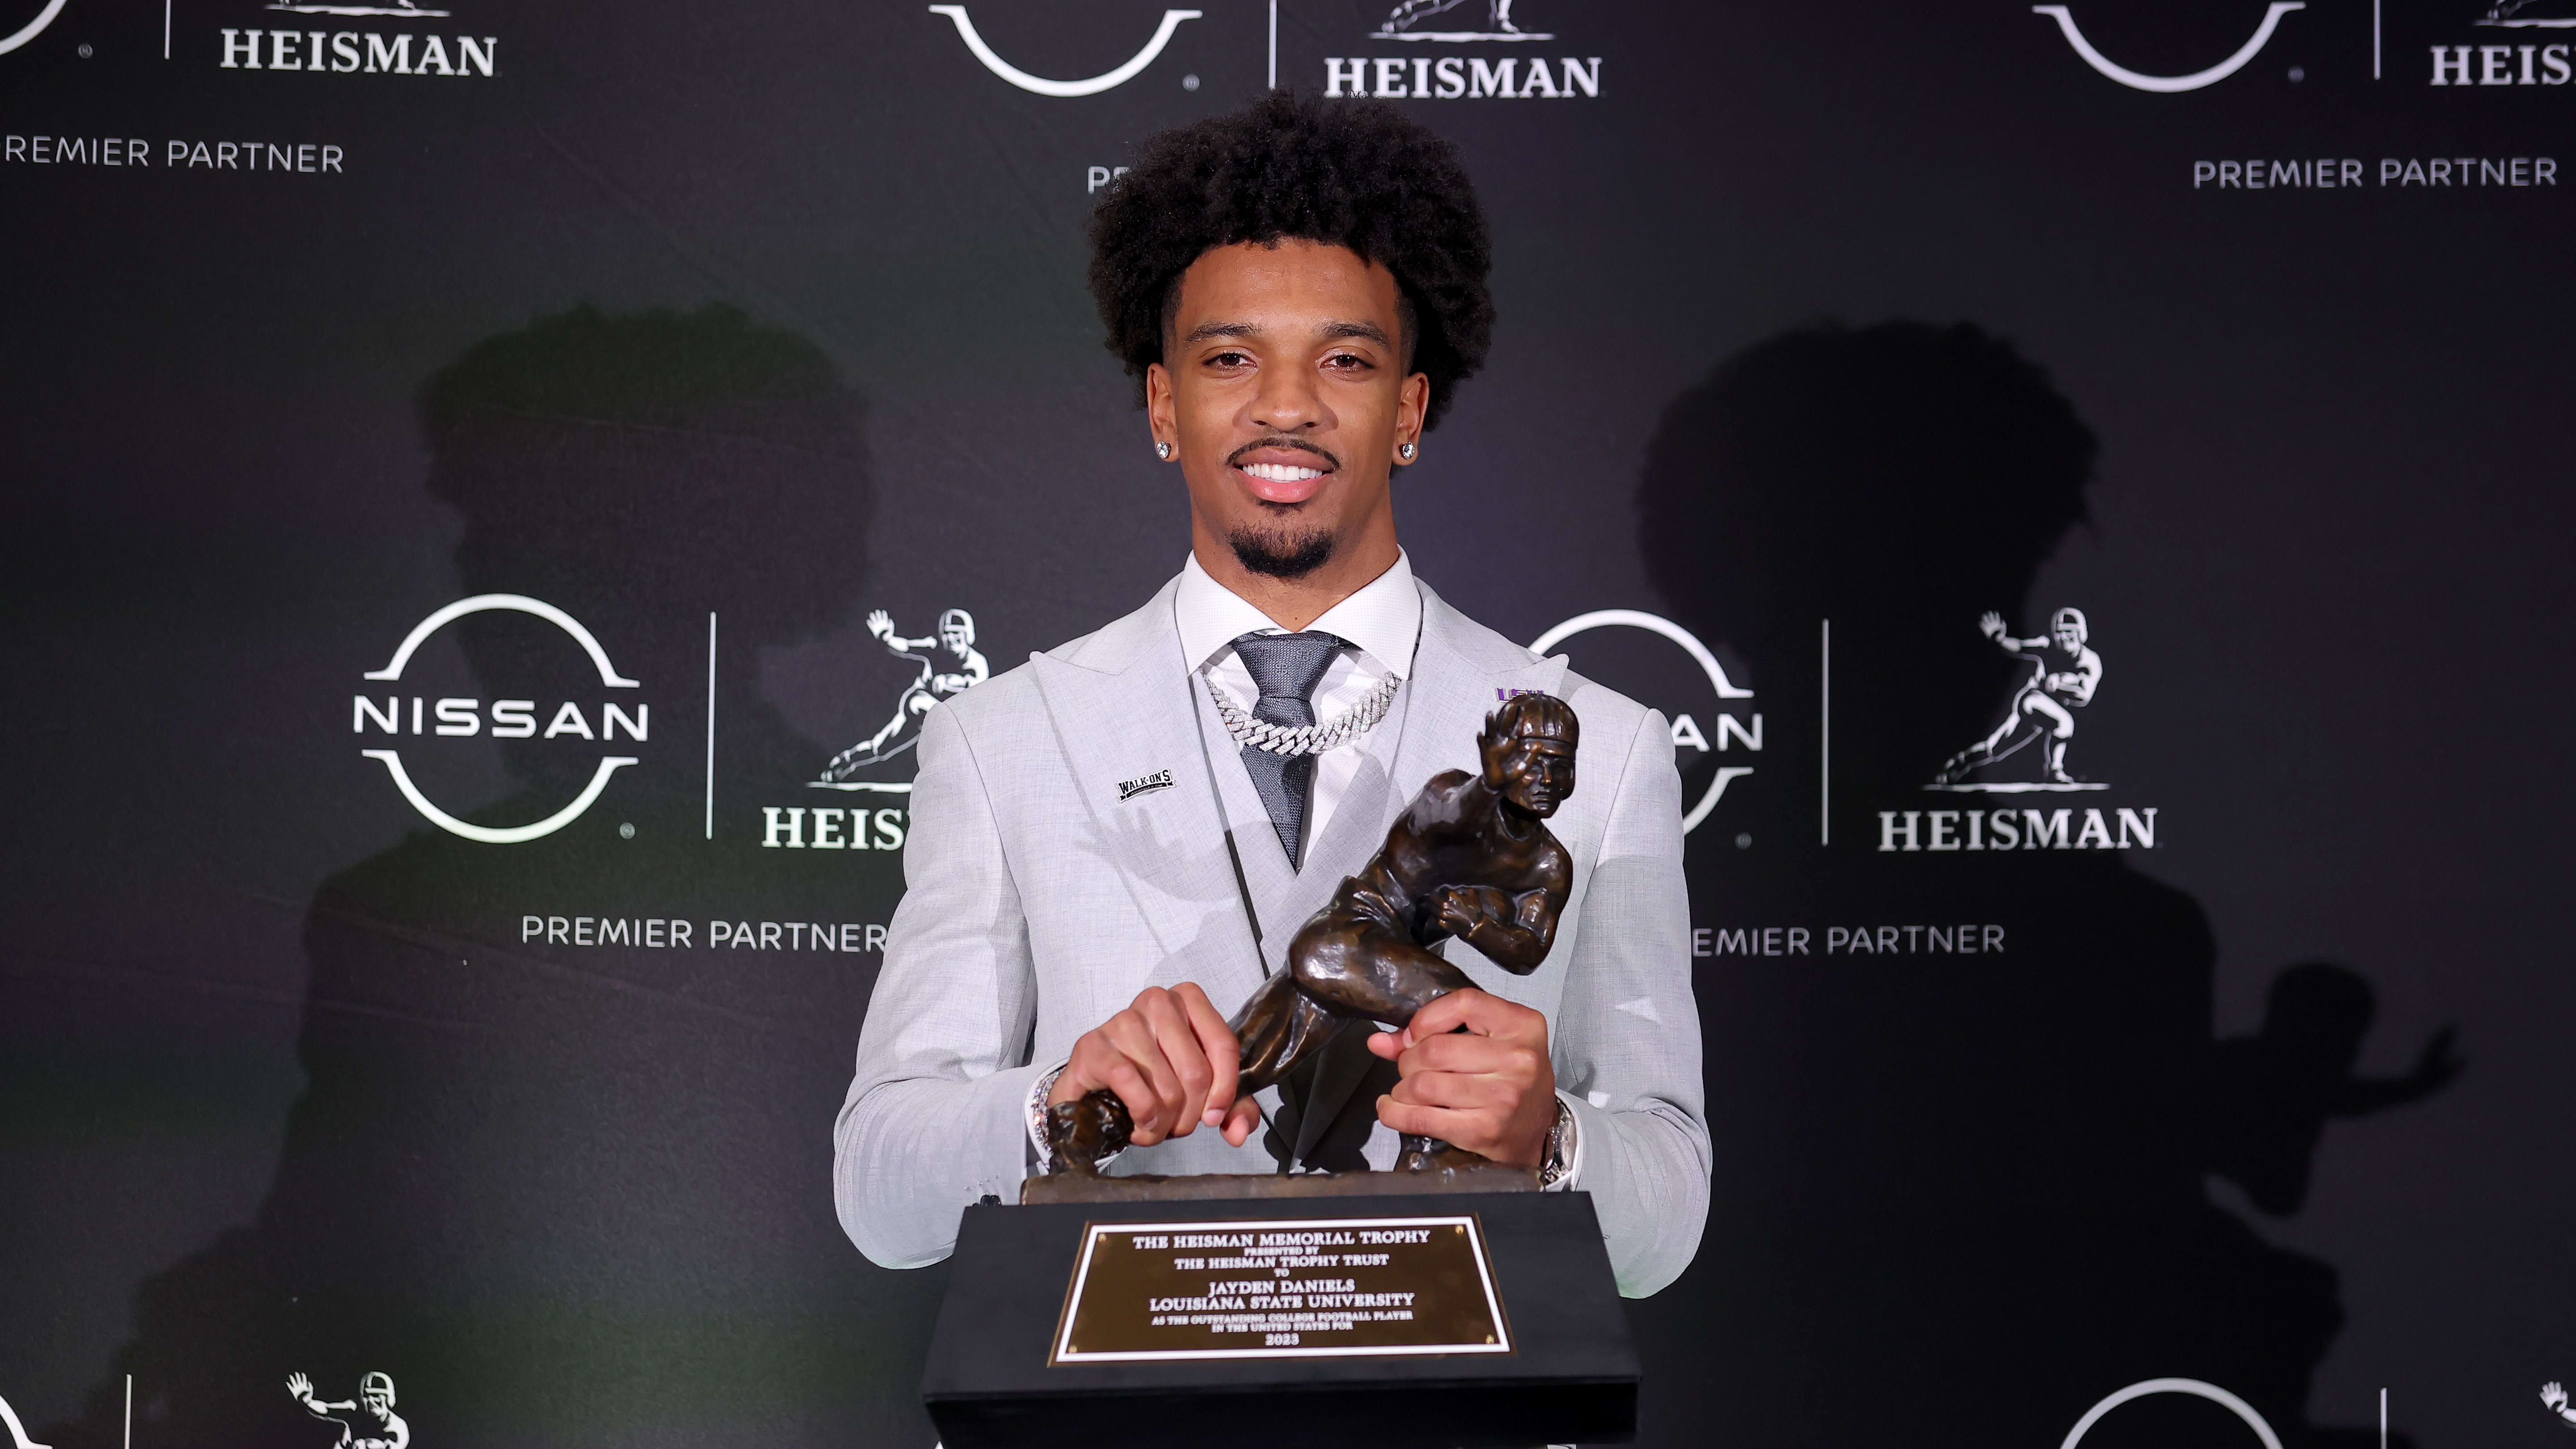 LSU Tigers quarterback Jayden Daniels poses for photos with the Heisman trophy.